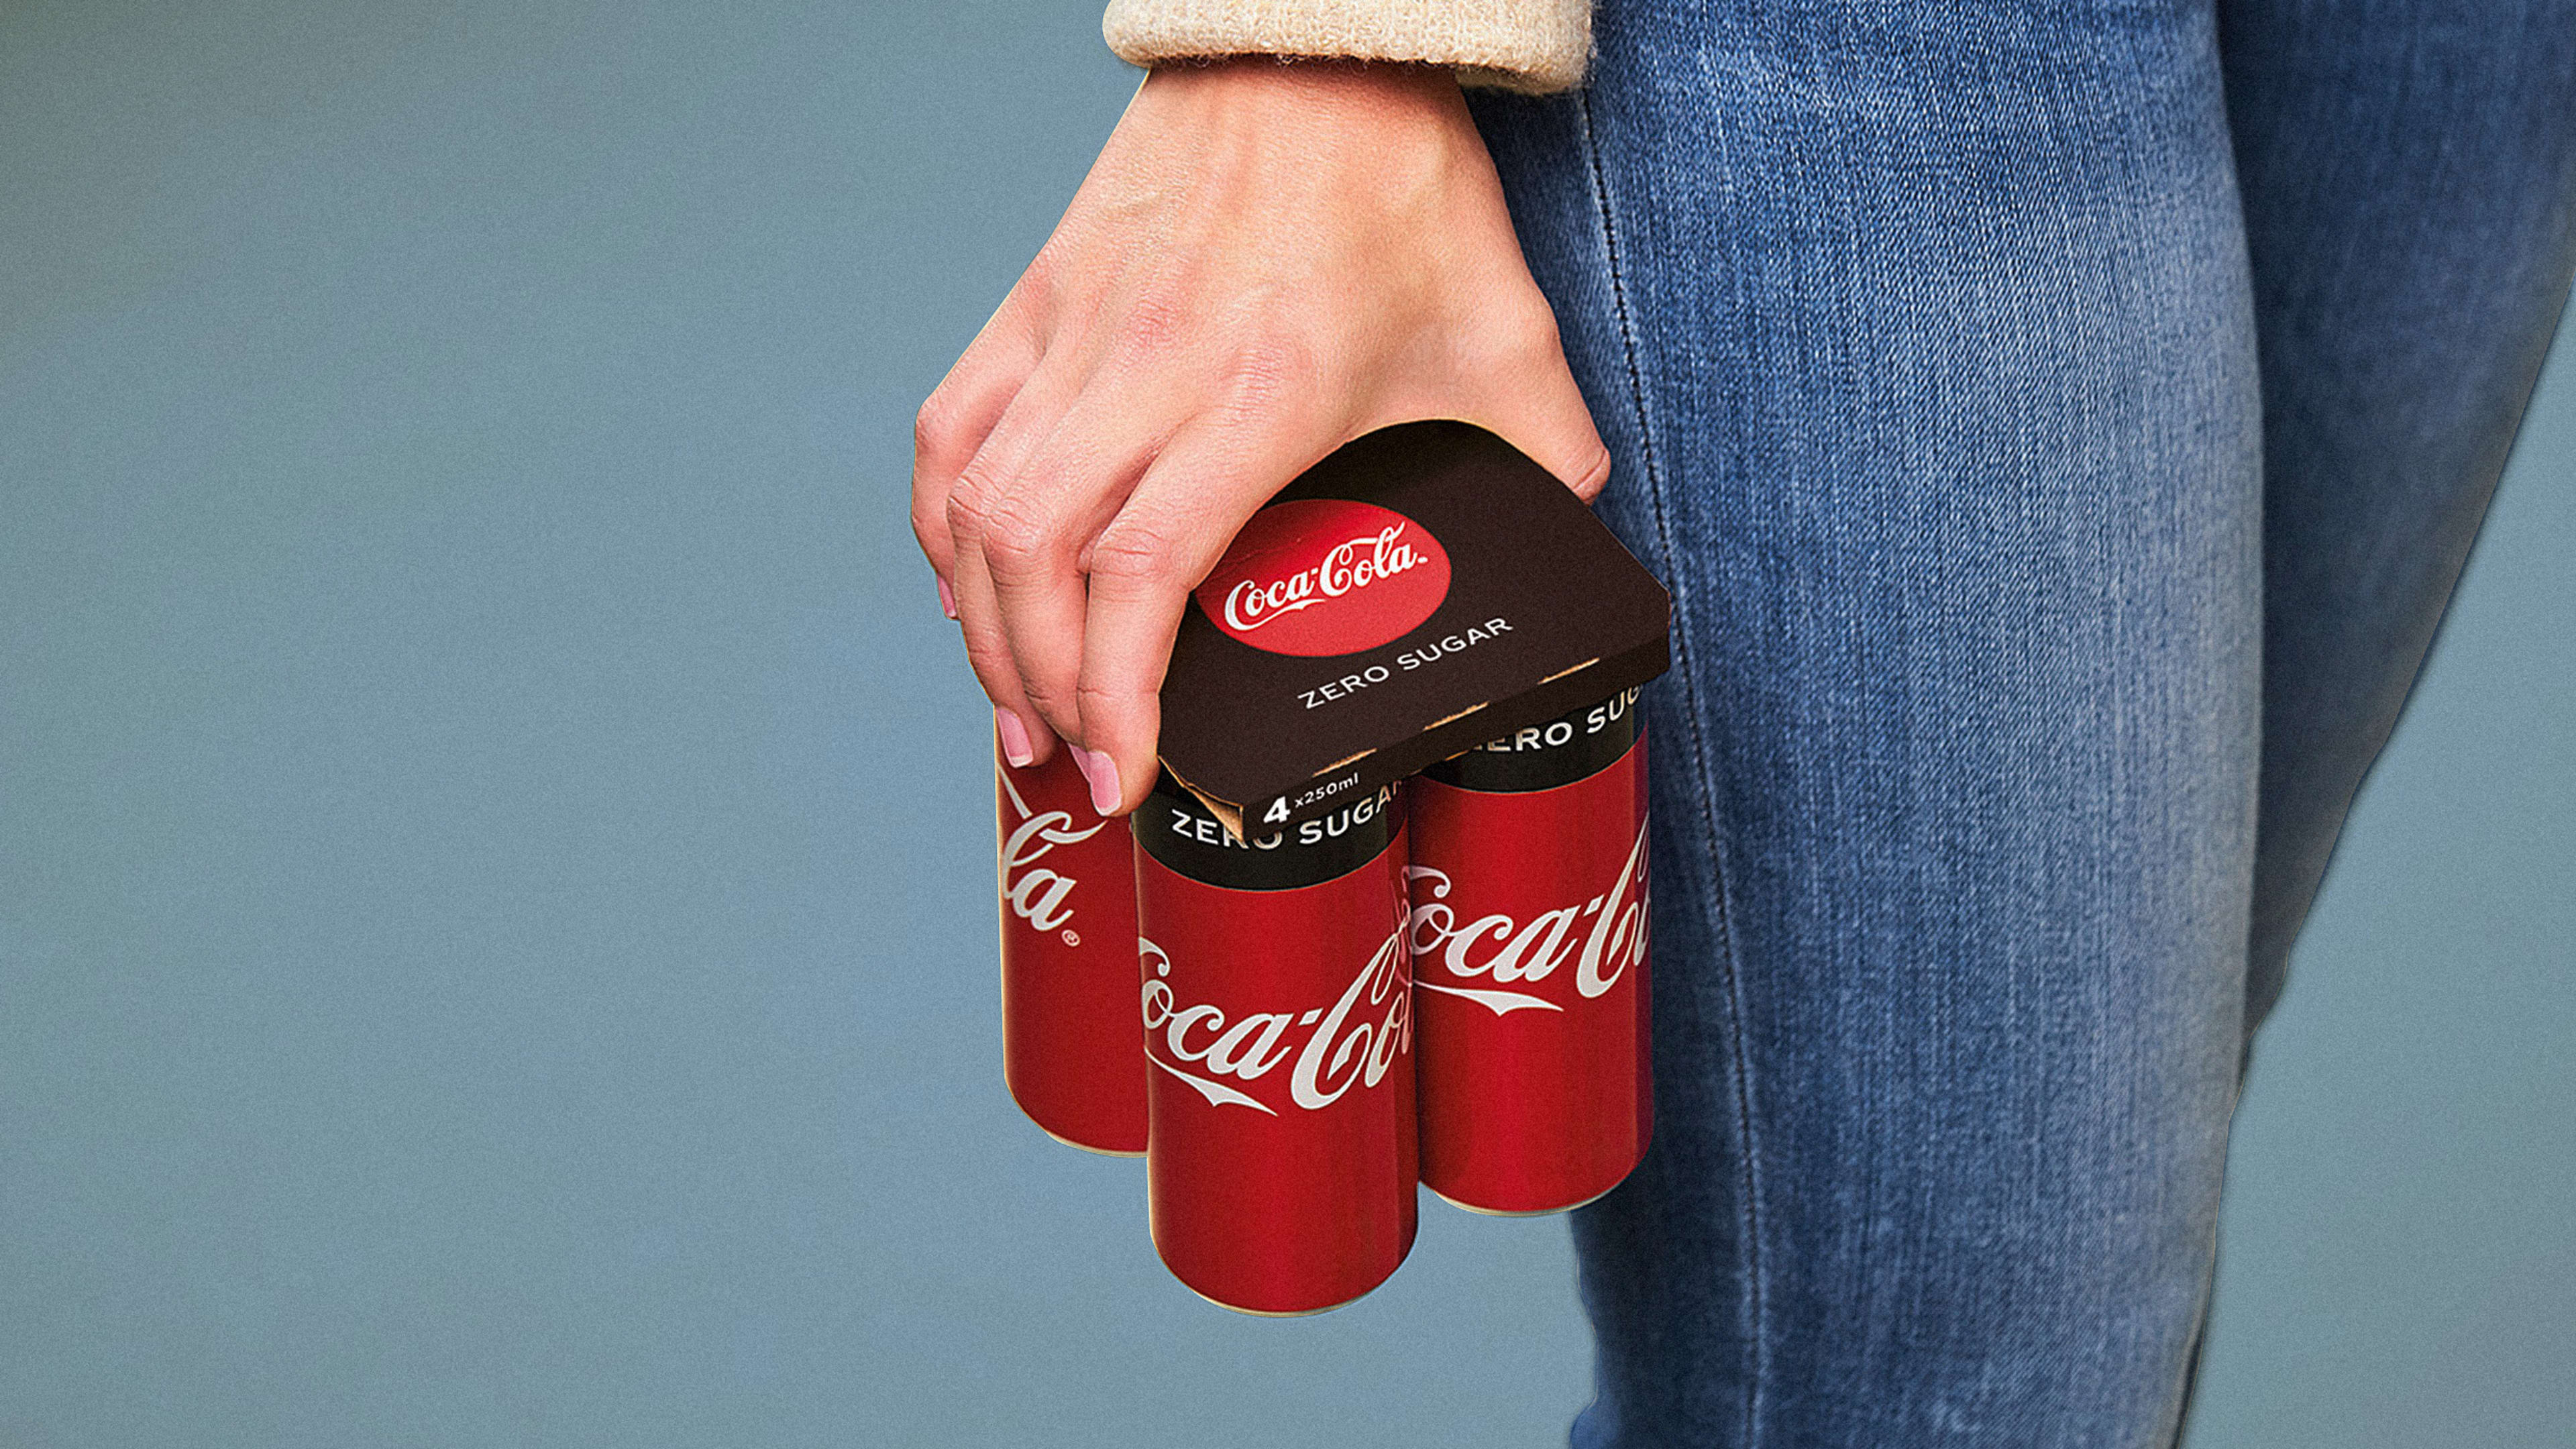 These new Coke and Bud packages ditch plastic six-pack rings for cardboard carriers